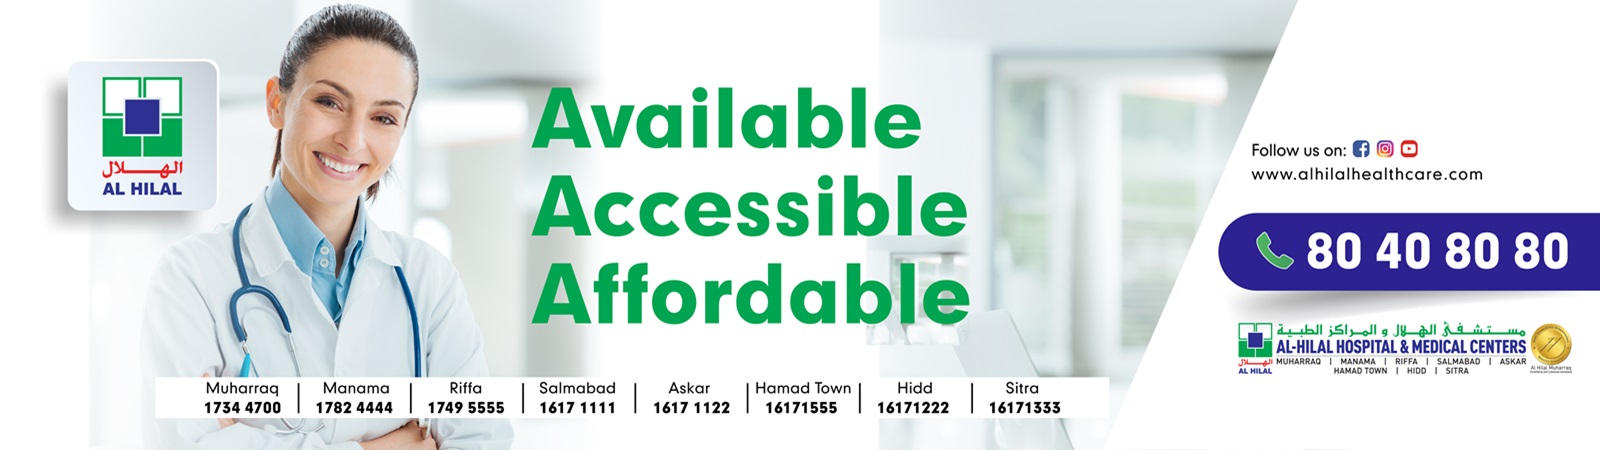 ALH-Desktop-Banner-Available-AccessibleAffordable-1600-x-450_1600x450